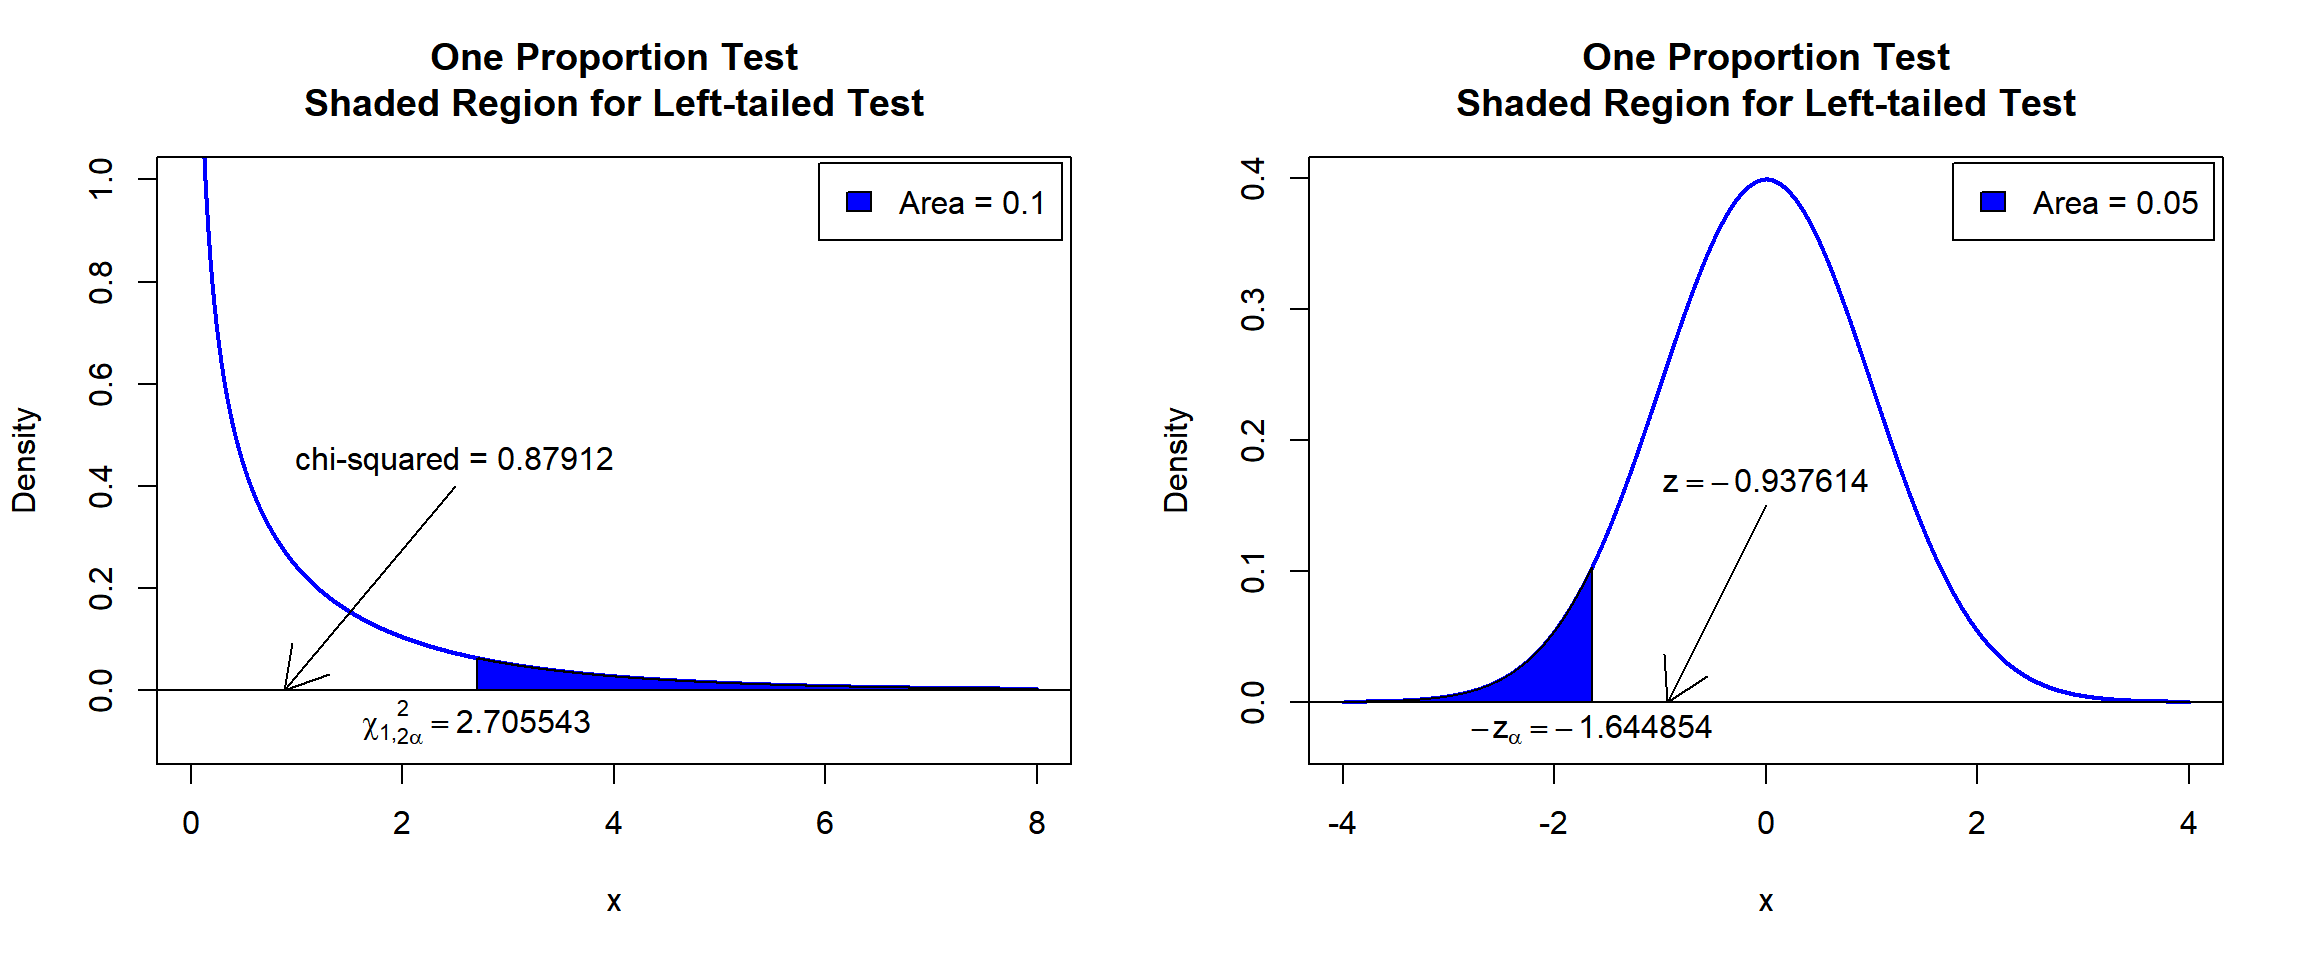 One Proportion Test Shaded Region for Left-tailed Test in R